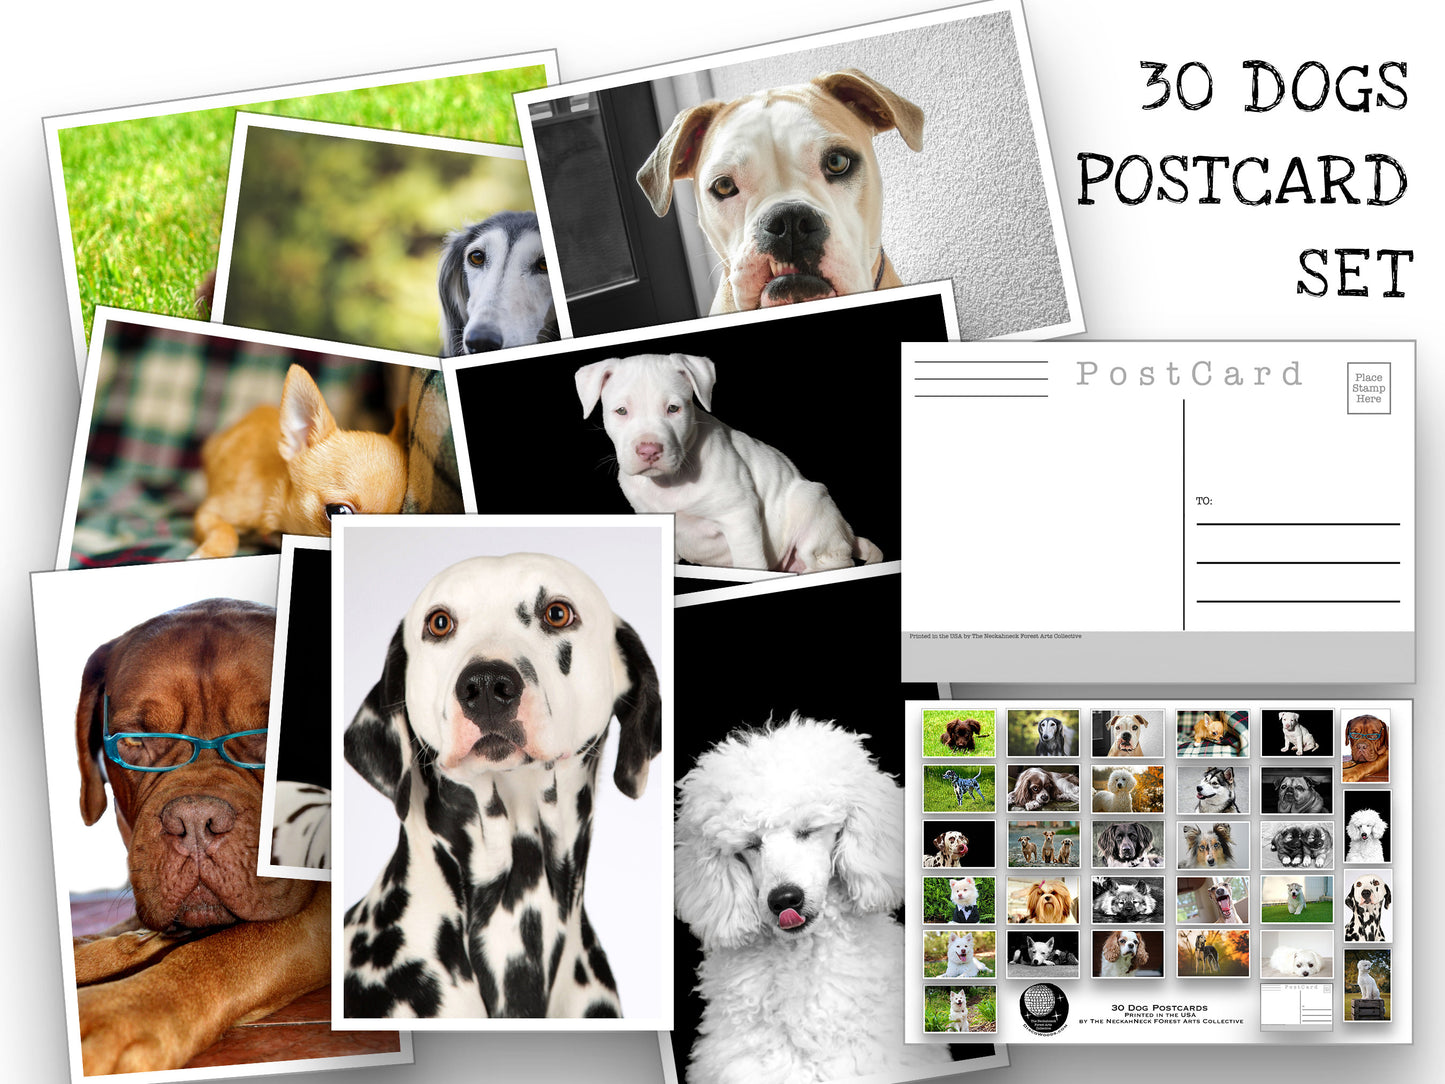 Dogs - Postcard set - 30 post cards - Dogs and Puppies - Scrapbooking - Letter Writing